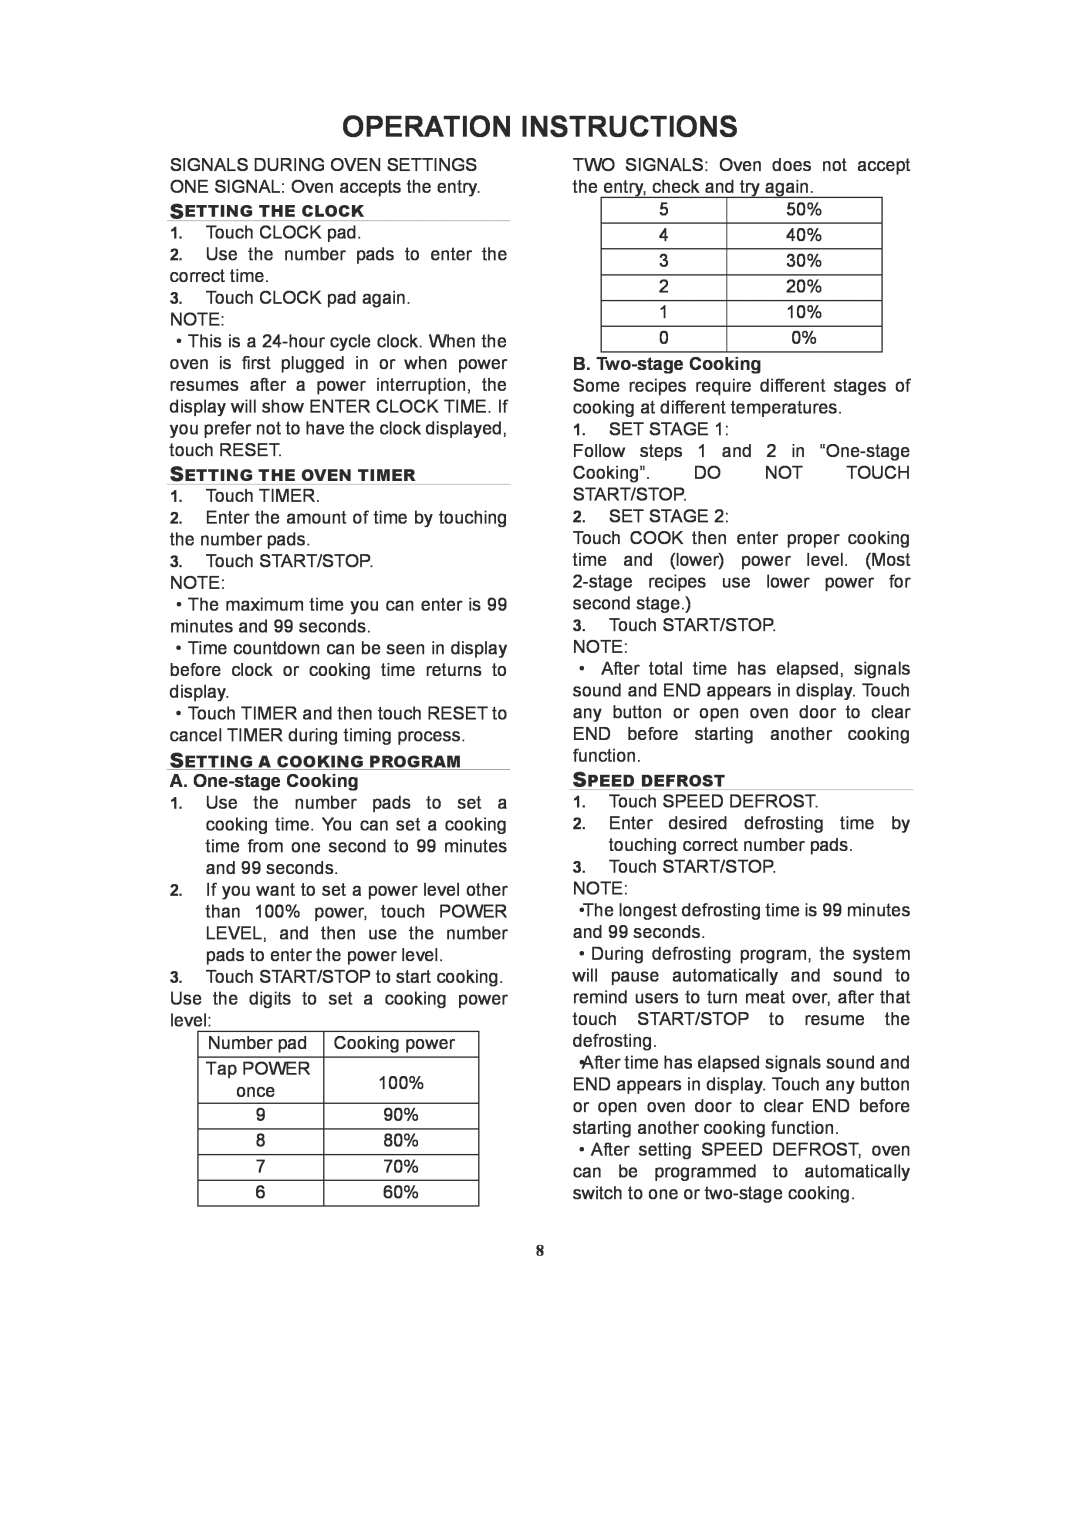 RCA RMW788 warranty Operation Instructions, A. One-stageCooking, B. Two-stageCooking 